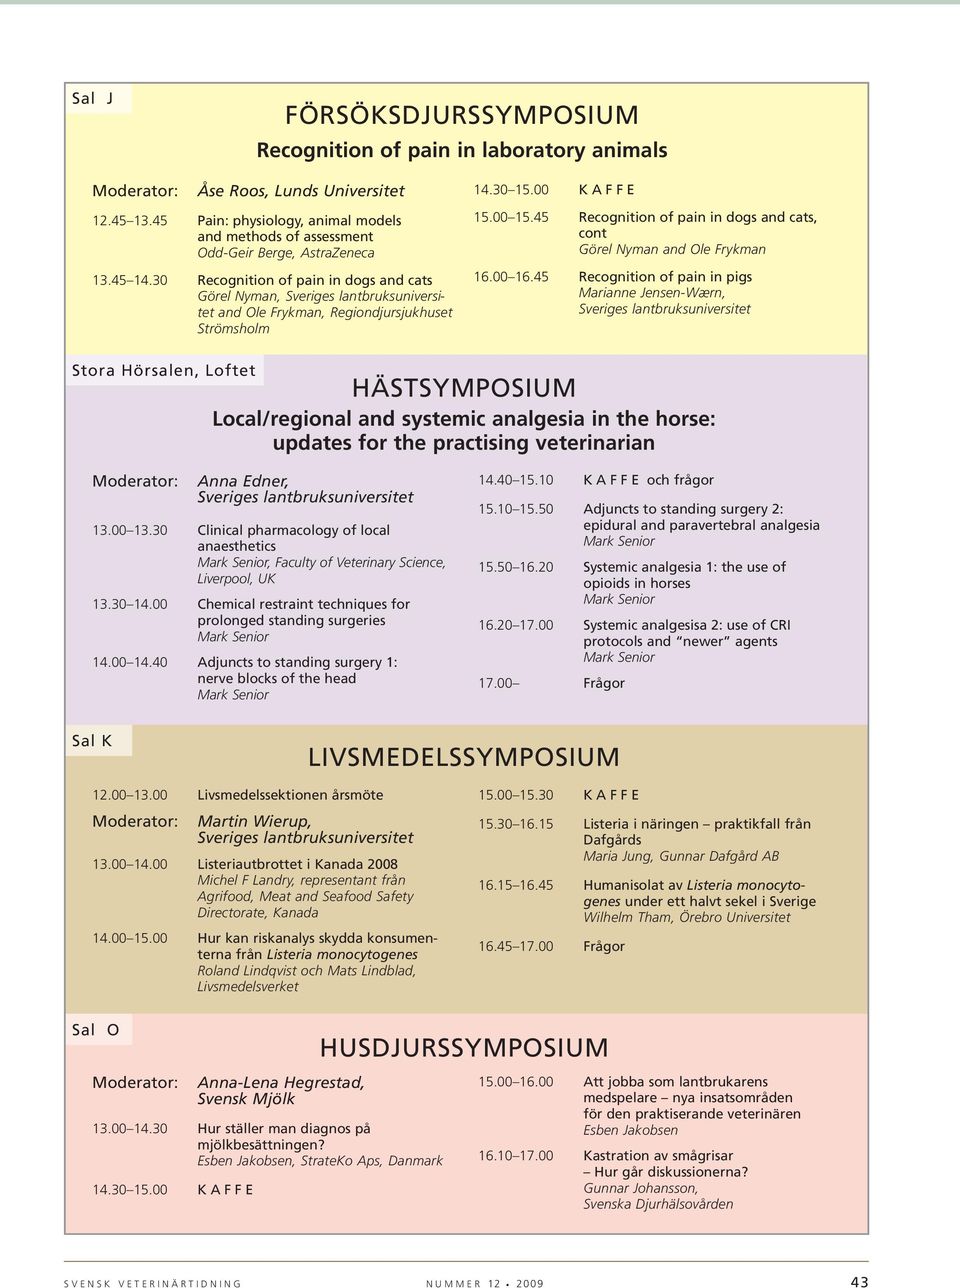 45 Recognition of pain in dogs and cats, cont Görel Nyman and Ole Frykman 16.00 16.